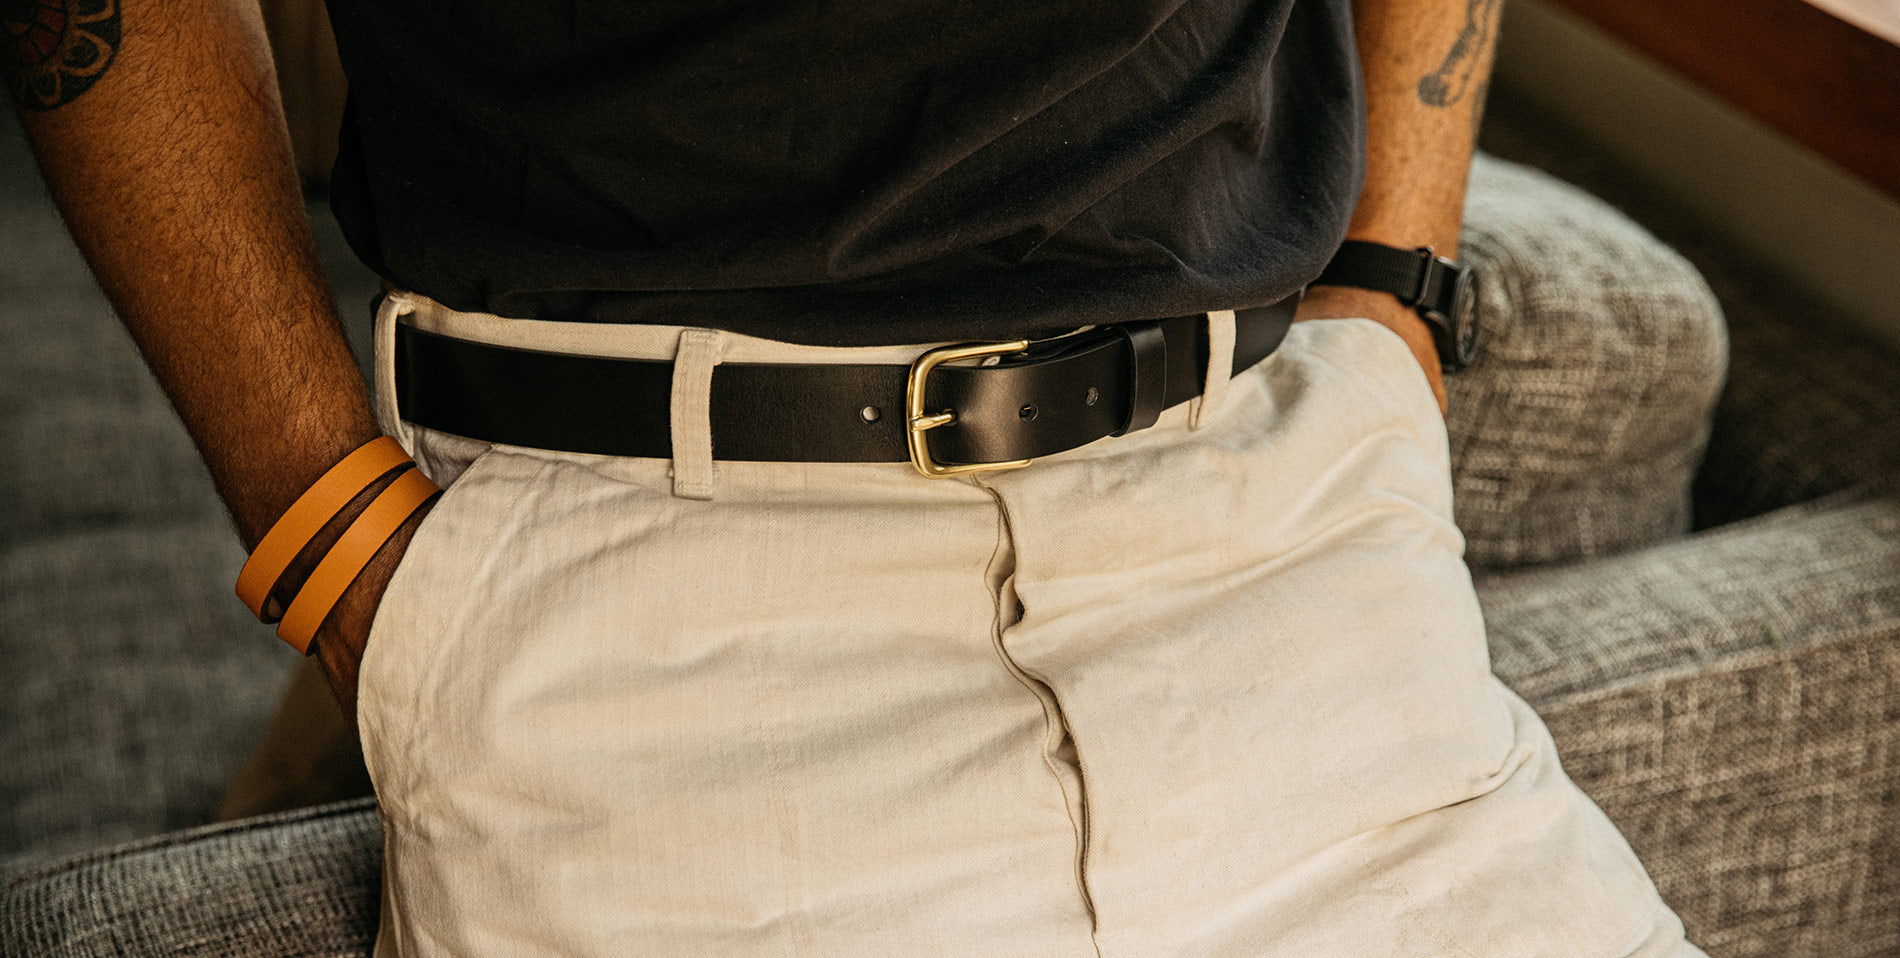 Shop Leather Belts, Made in the U.S.